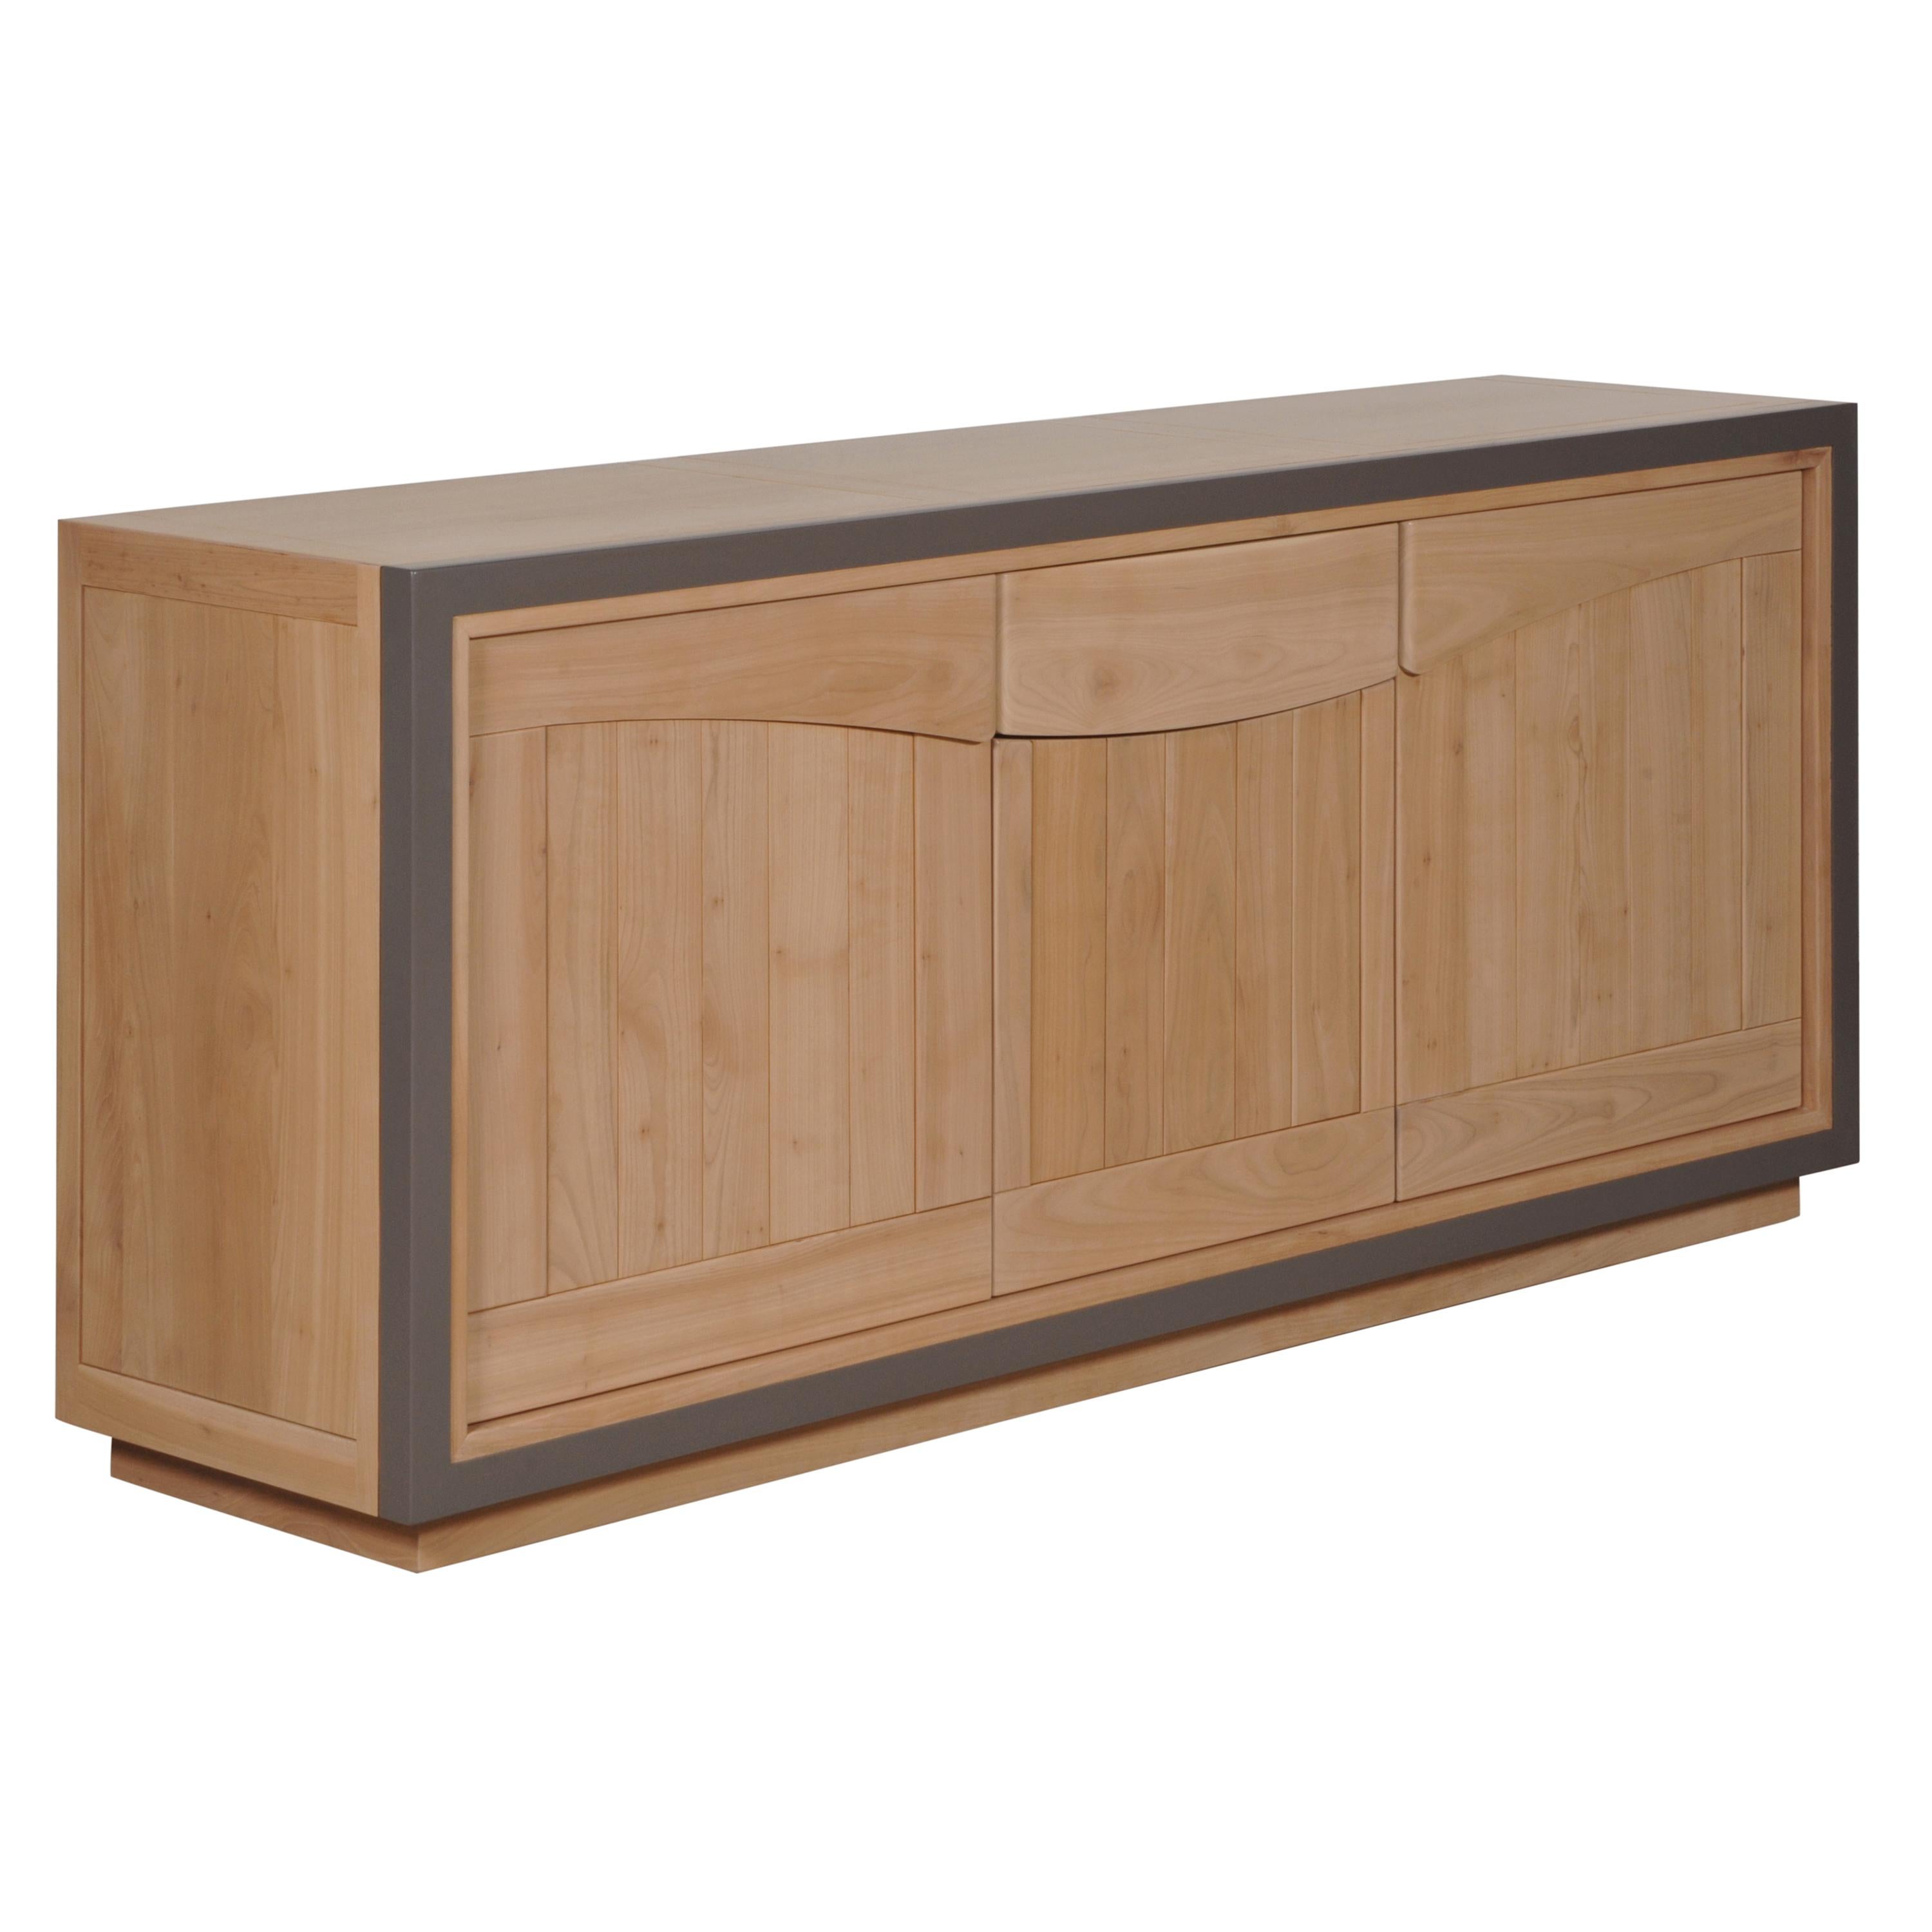 Hand-Crafted Contemporary Sideboard in Cherry, 3 Doors and 1 Drawer, 100% Made in France For Sale